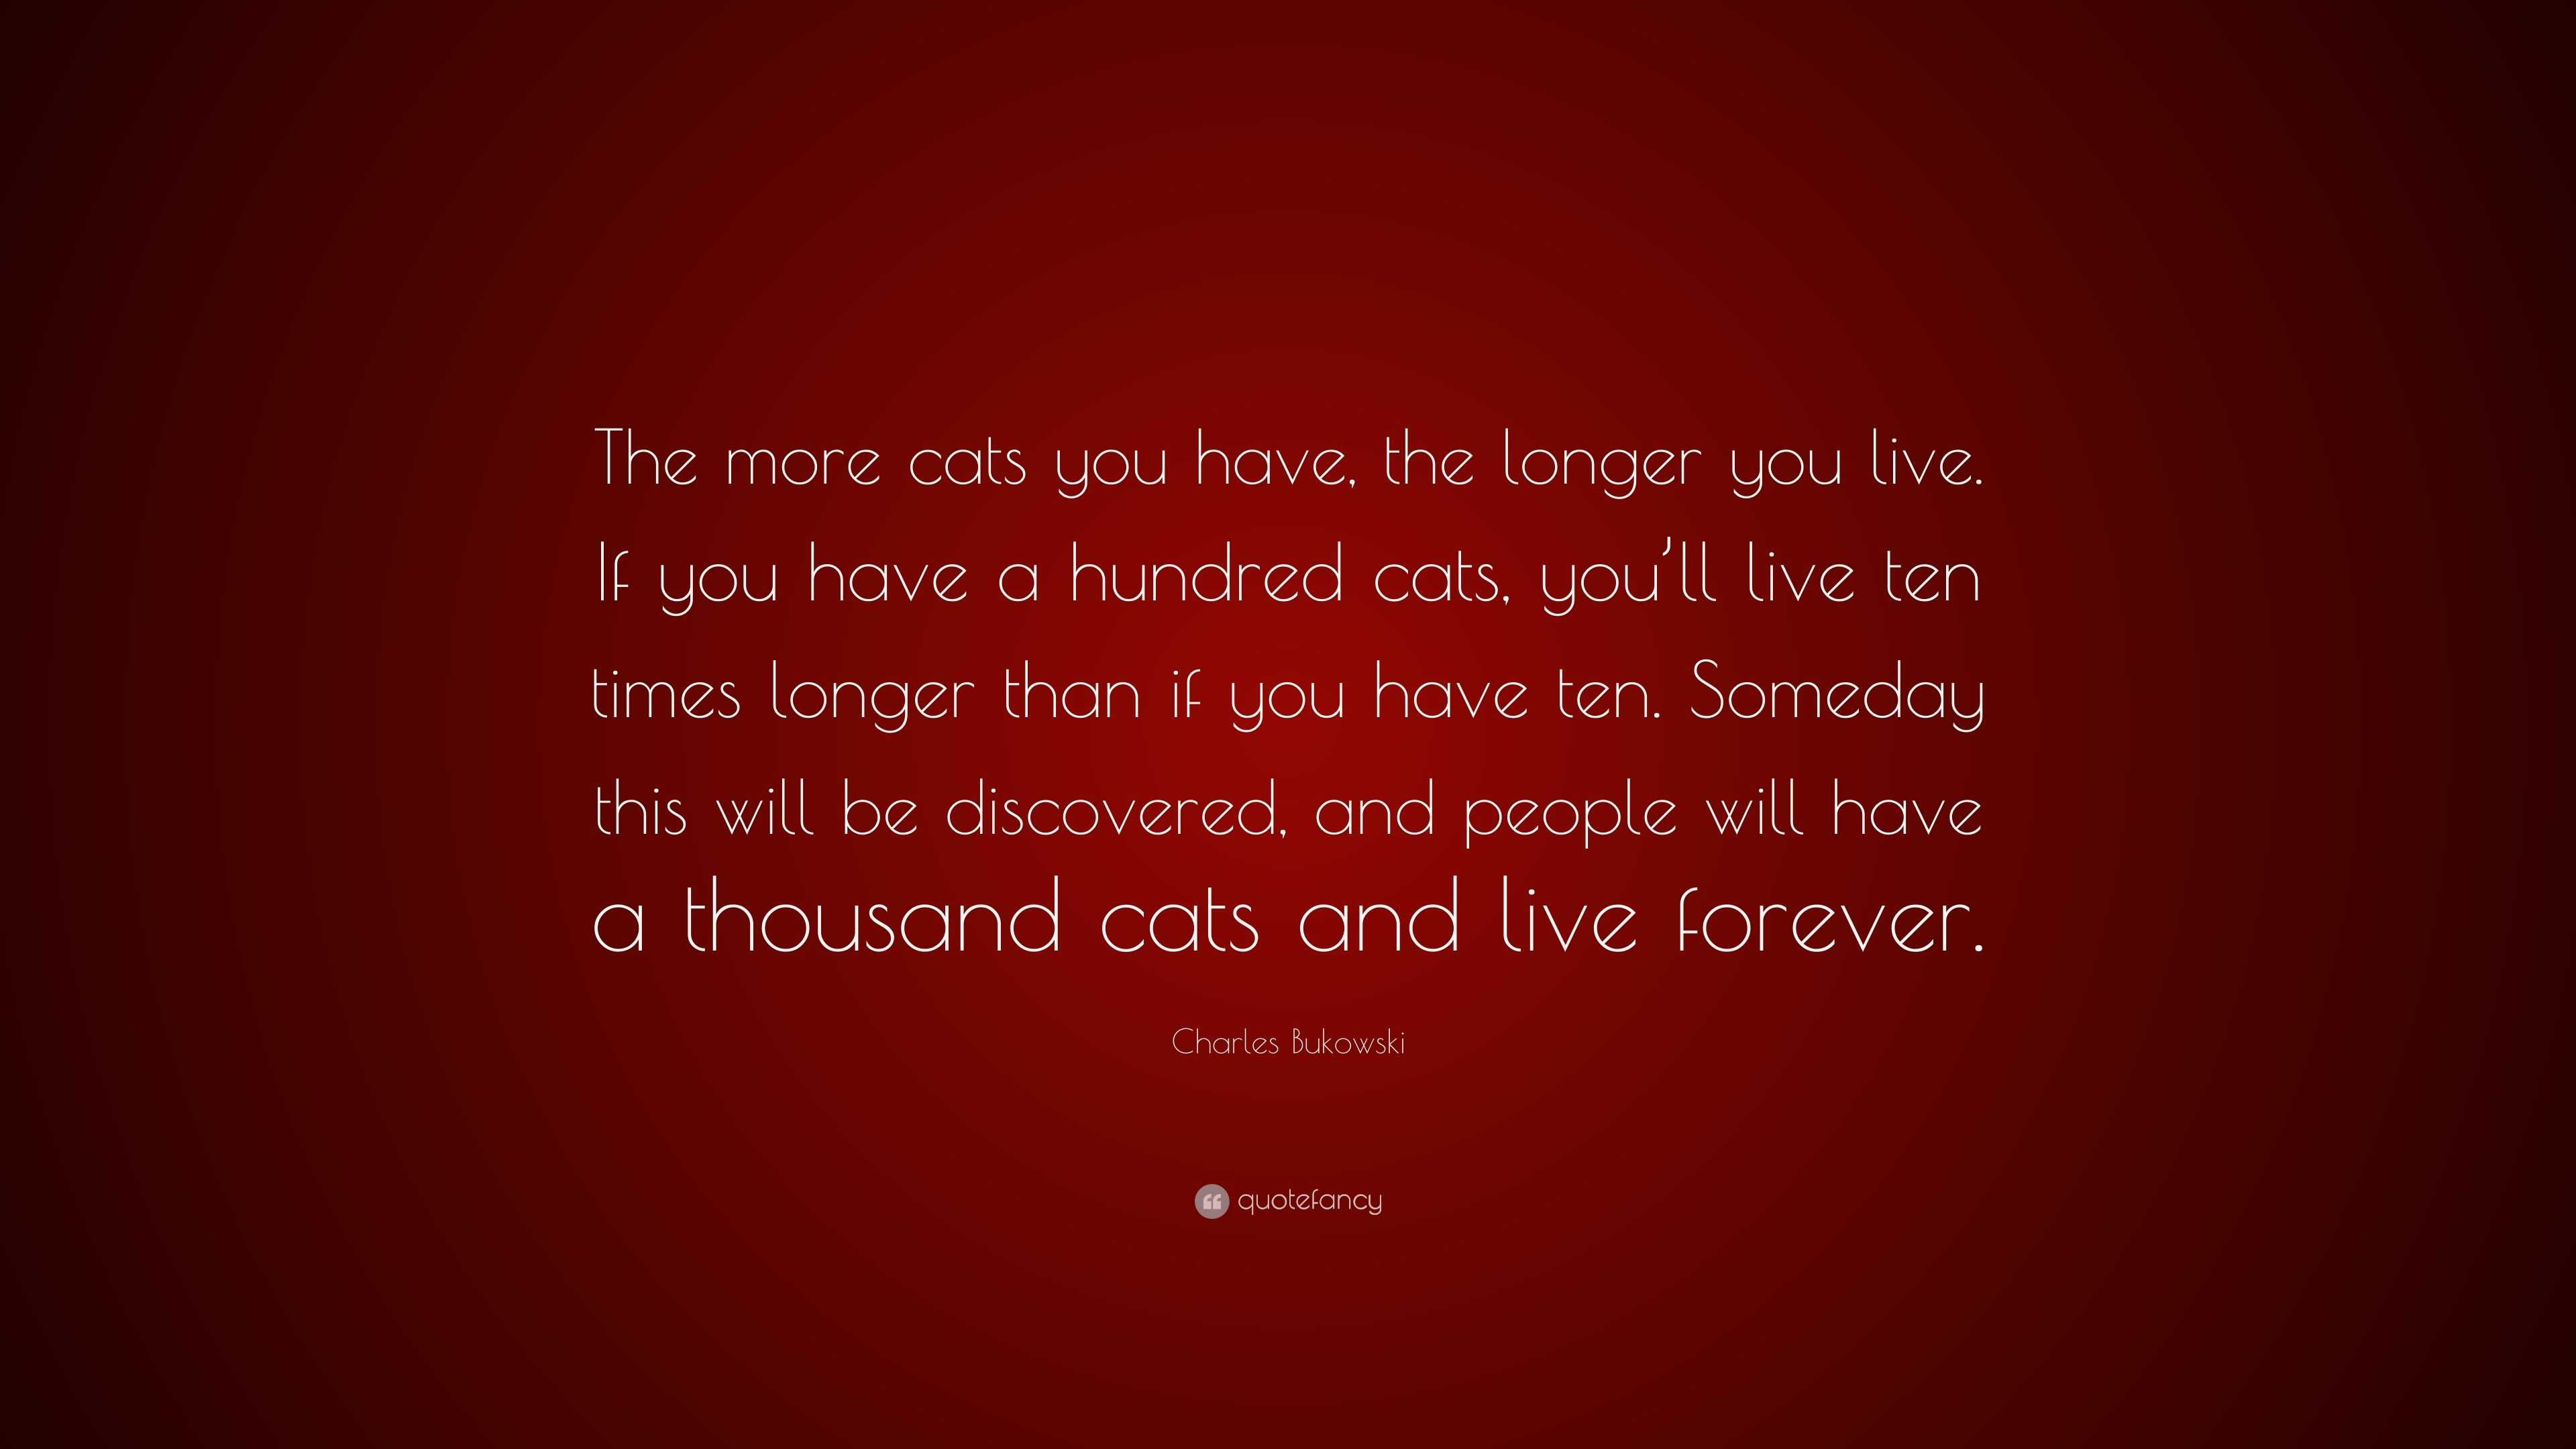 Charles Bukowski Quote: “The more cats you have, the longer you live ...